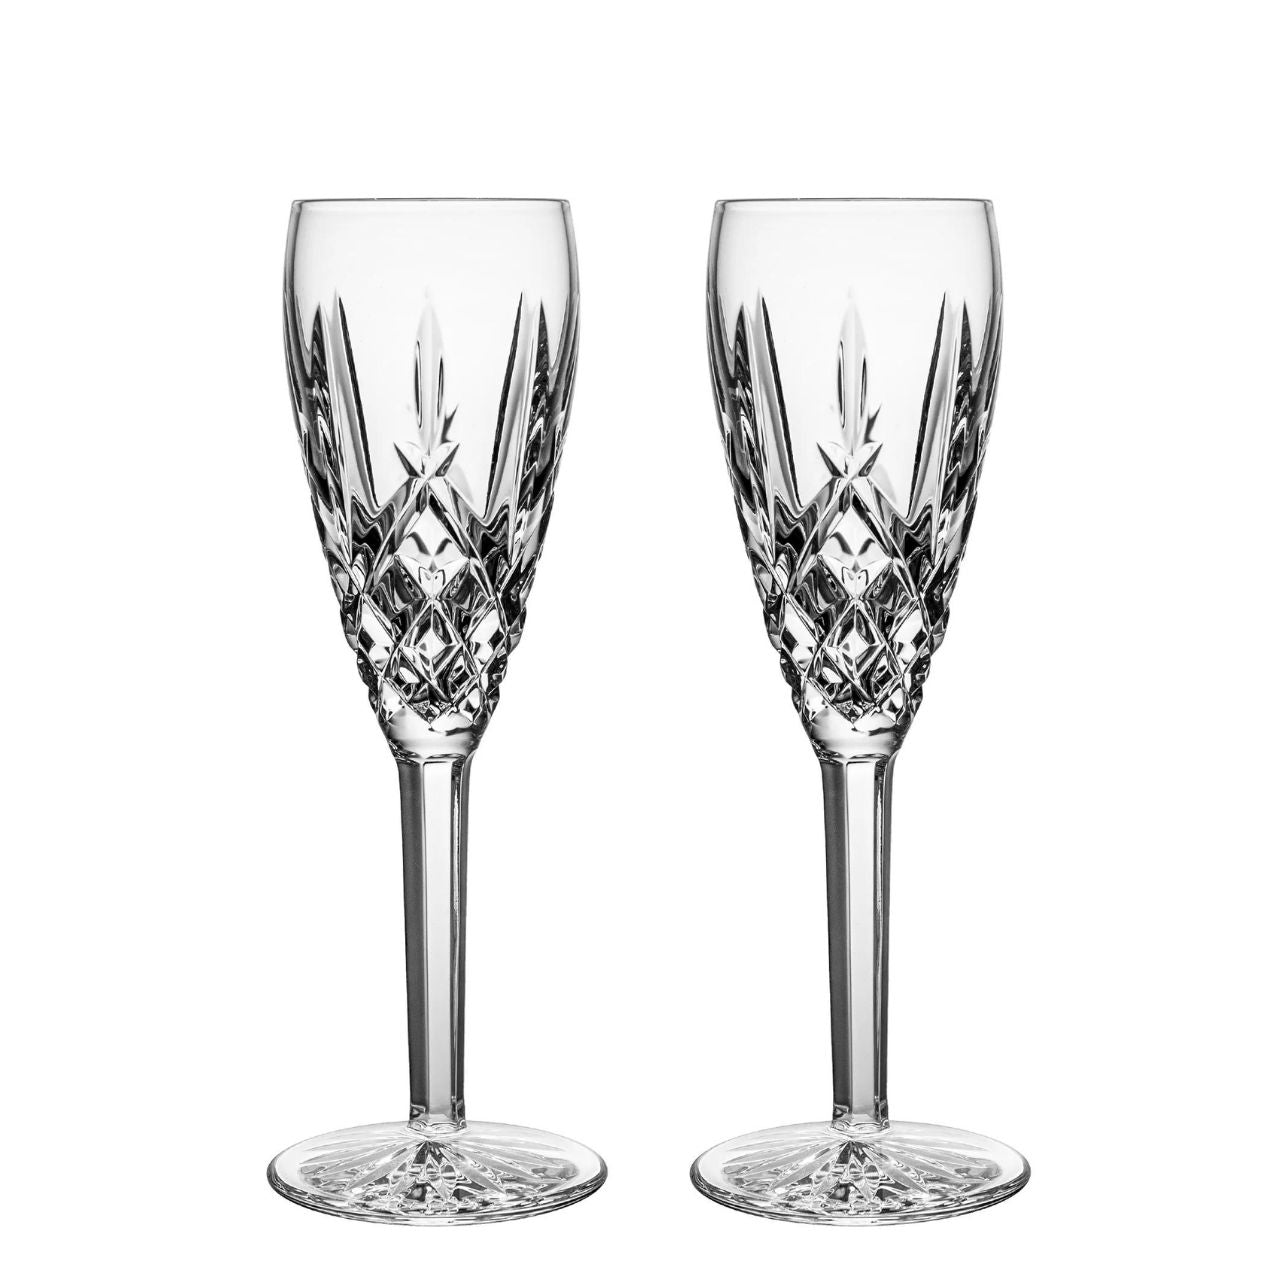 Waterford Crystal Araglin Flute Champagne Pair  The Araglin Collection by Waterford is characterized by diamond and vertical wedge cuts and an elegant tulip design, creating stunning crystal and stemware with a truly unsurpassed shine and brilliance.